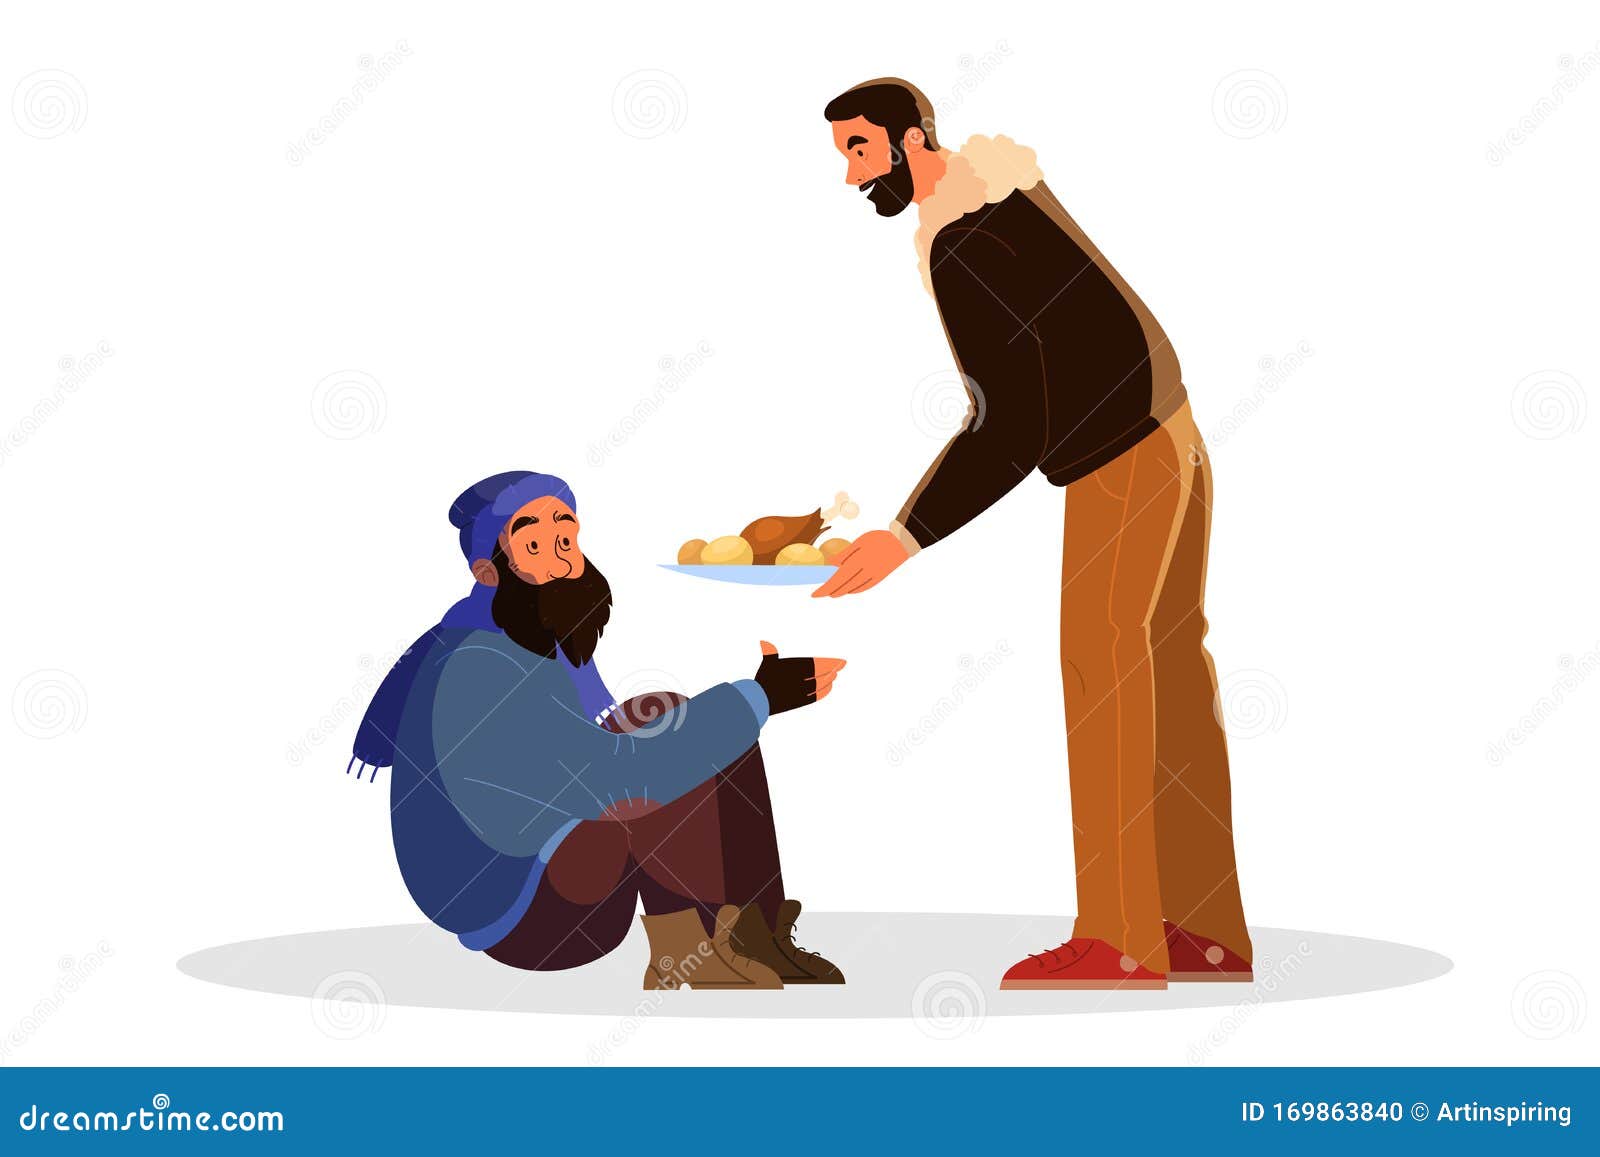 people helping others in need cartoon